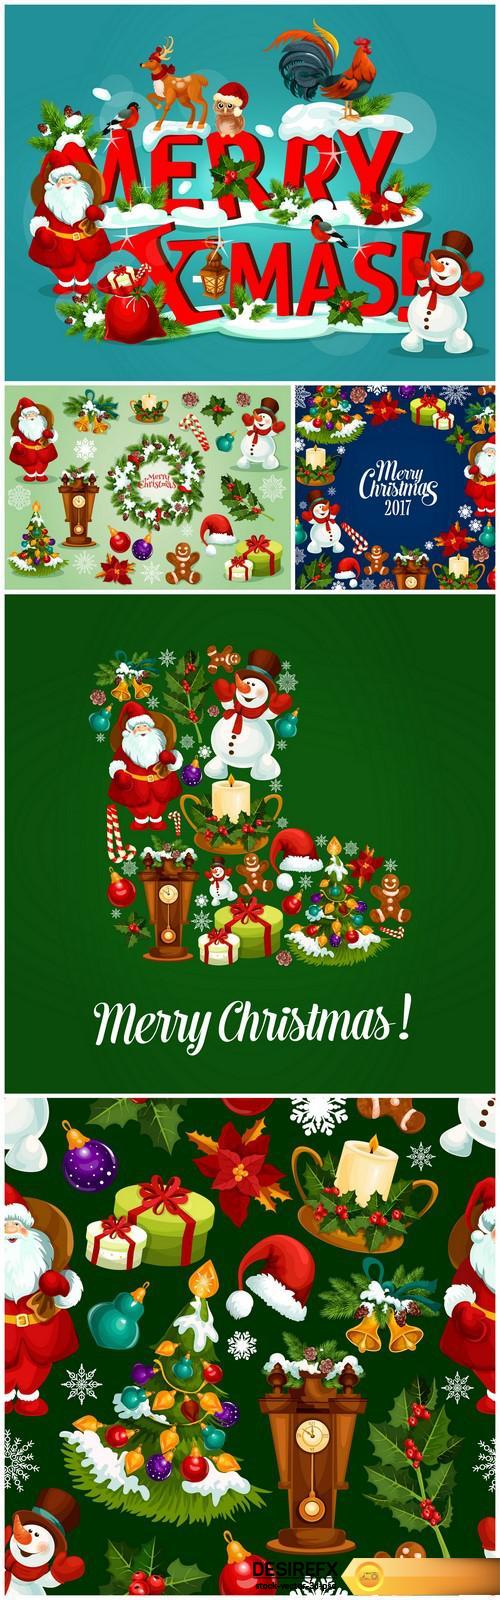 Christmas and New Year greeting banner 2017 #3 5X EPS